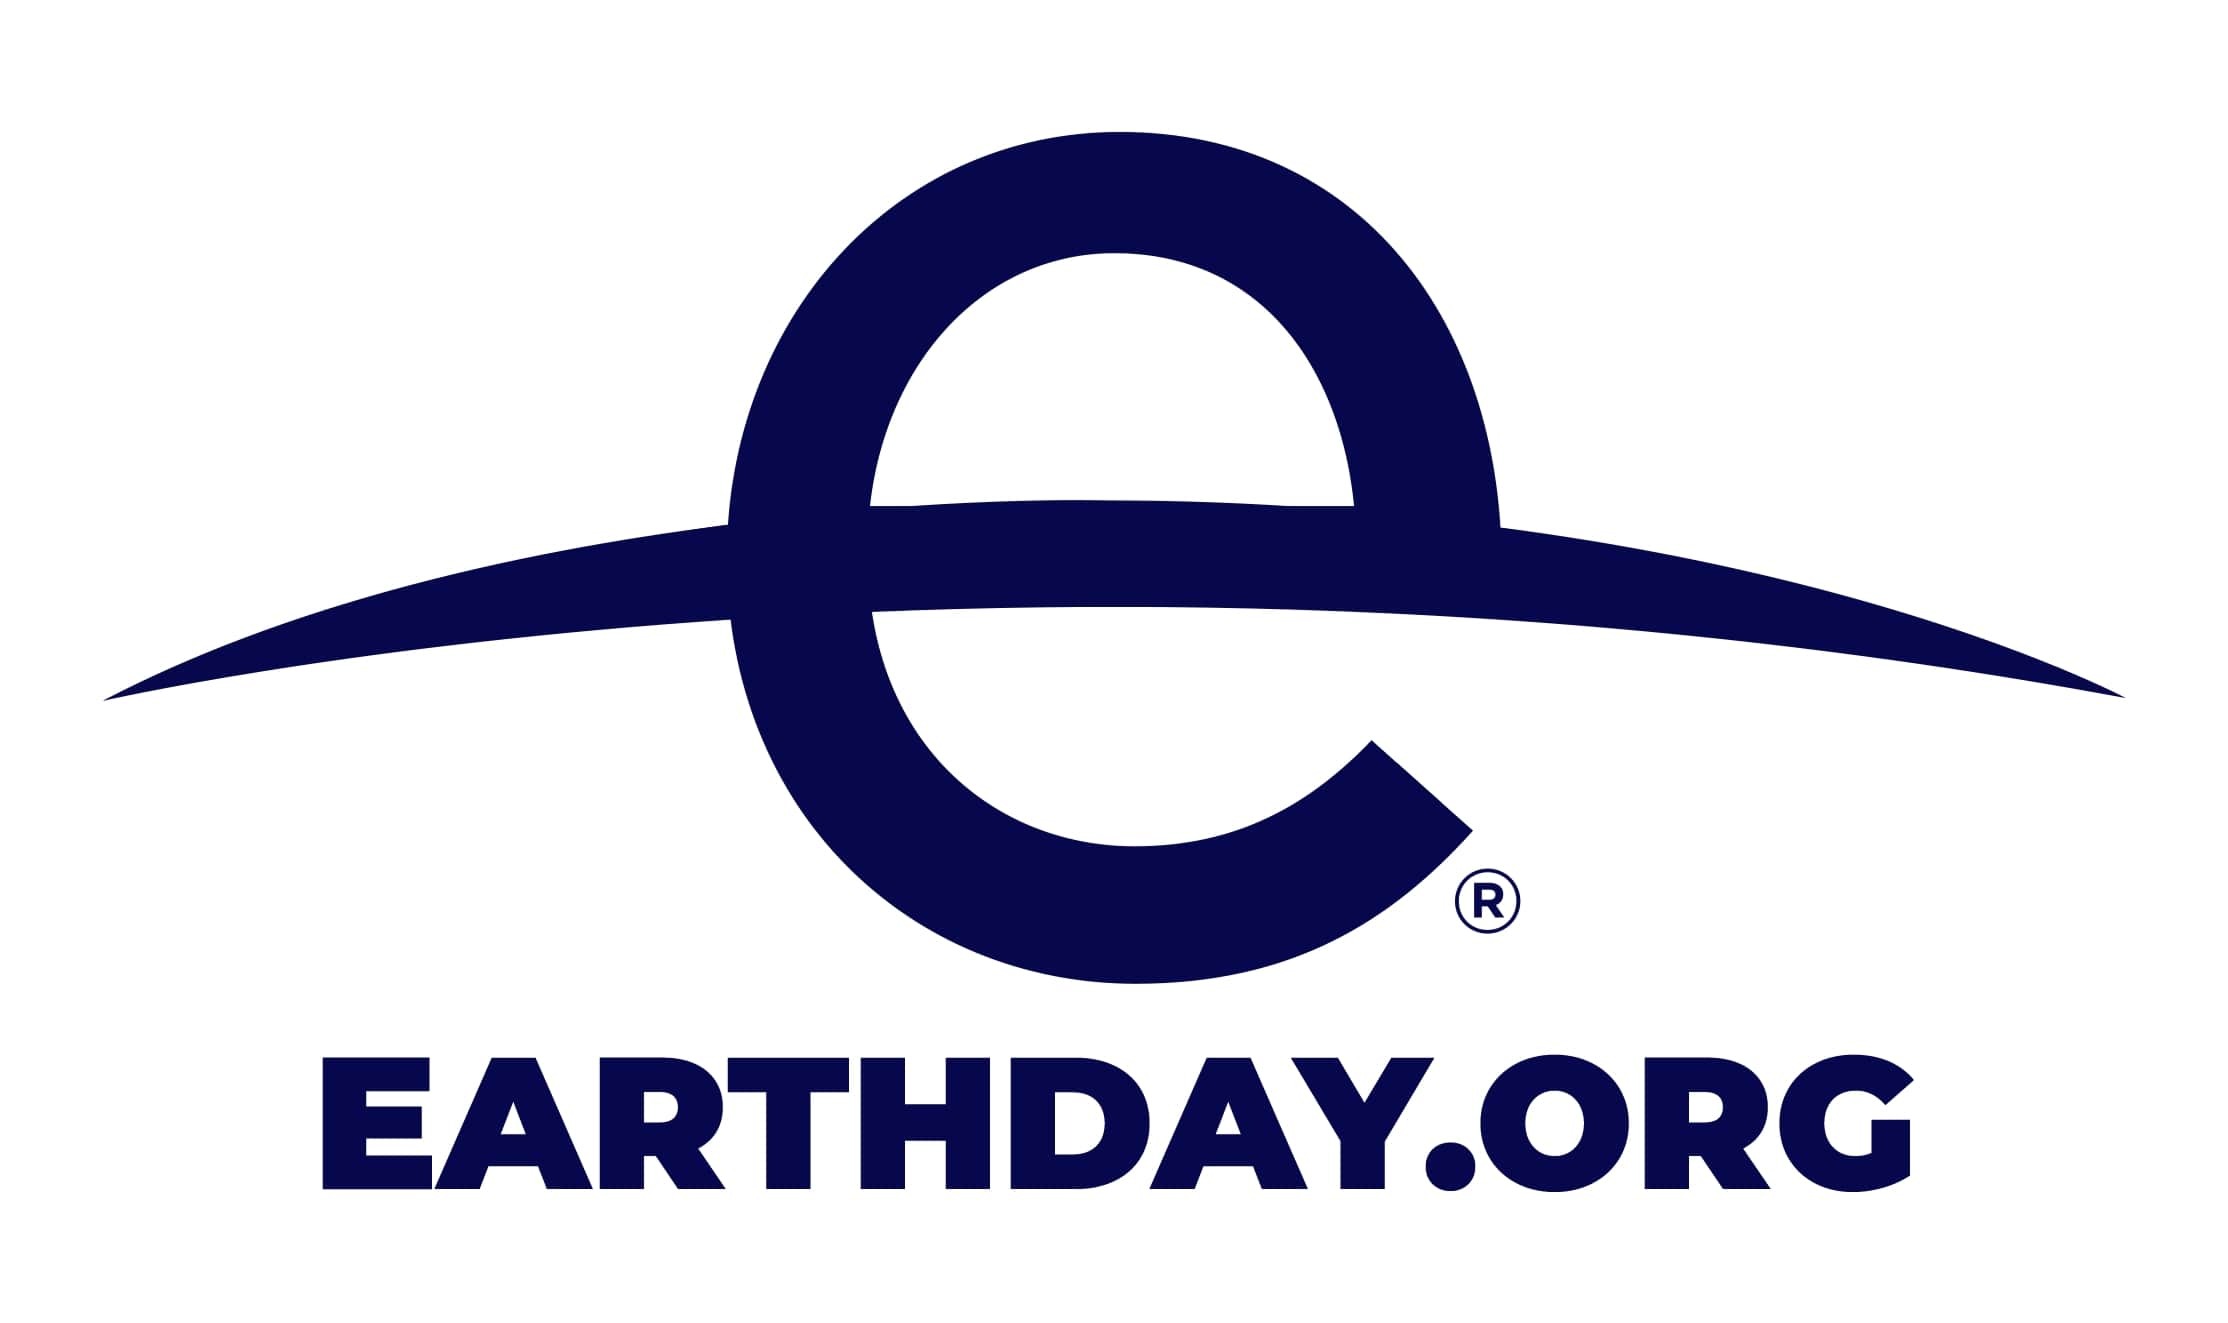 EARTHDAY.ORG RELEASES CLIMATE EDUCATION vs. THE CLIMATE CRISIS